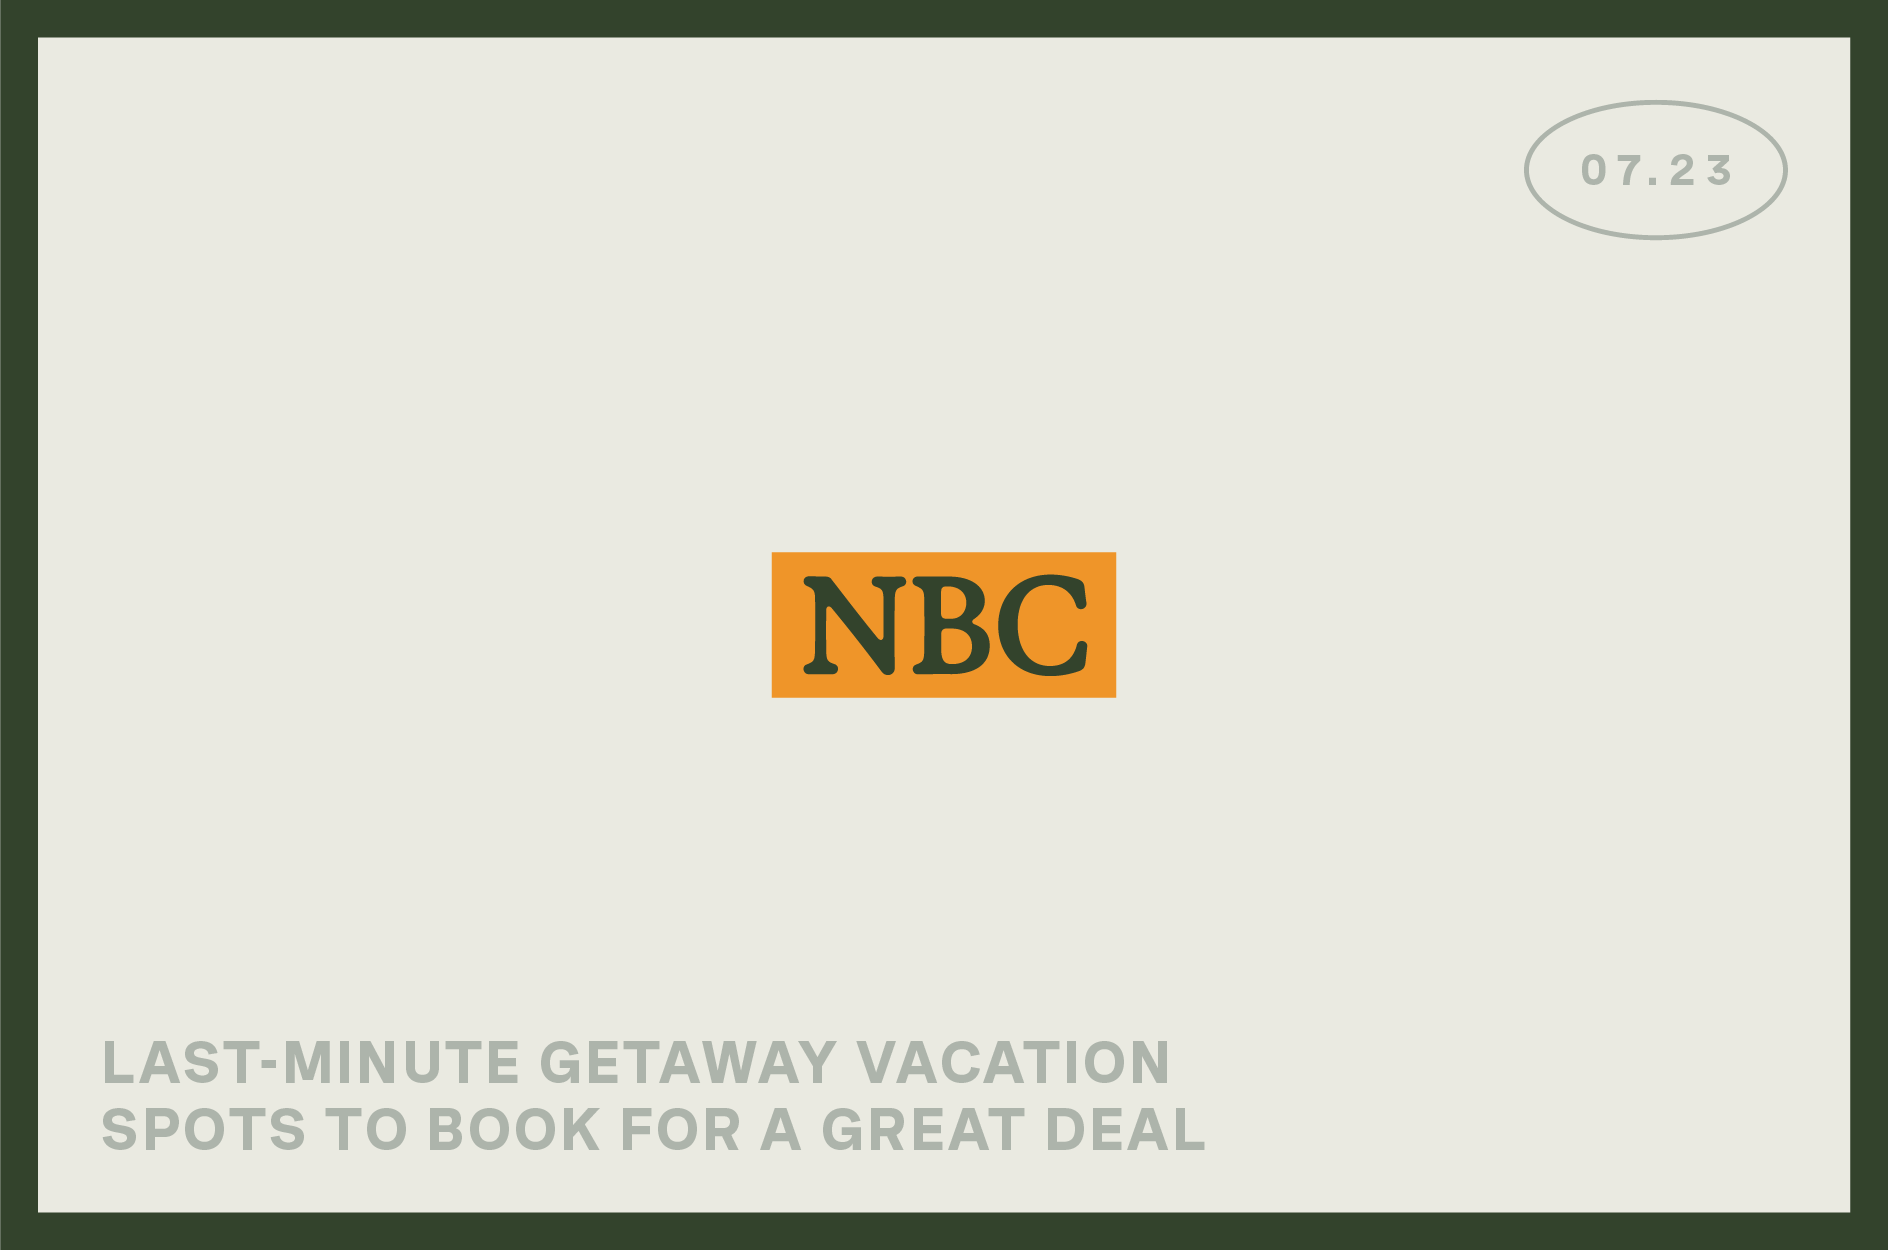 "NBC" banner features "Last-minute getaway vacation spots to book for a great deal."